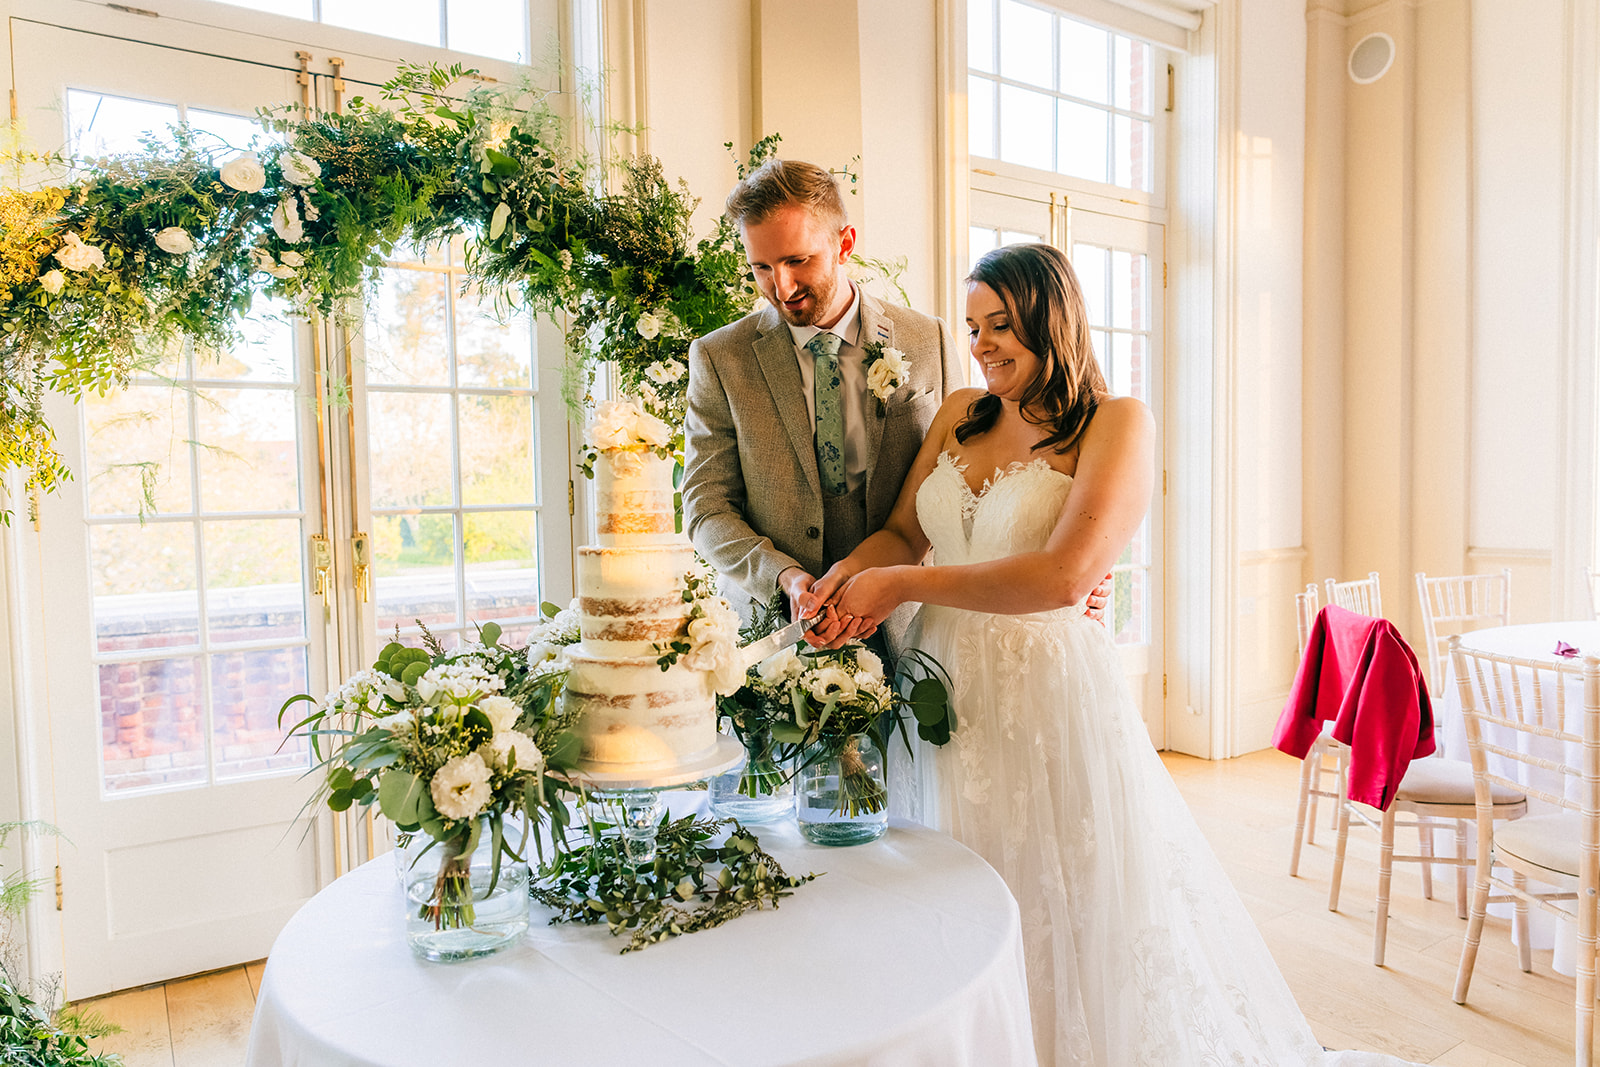 Hodsock Priory Wedding Photography - the bride and groom cutting the wedding cake